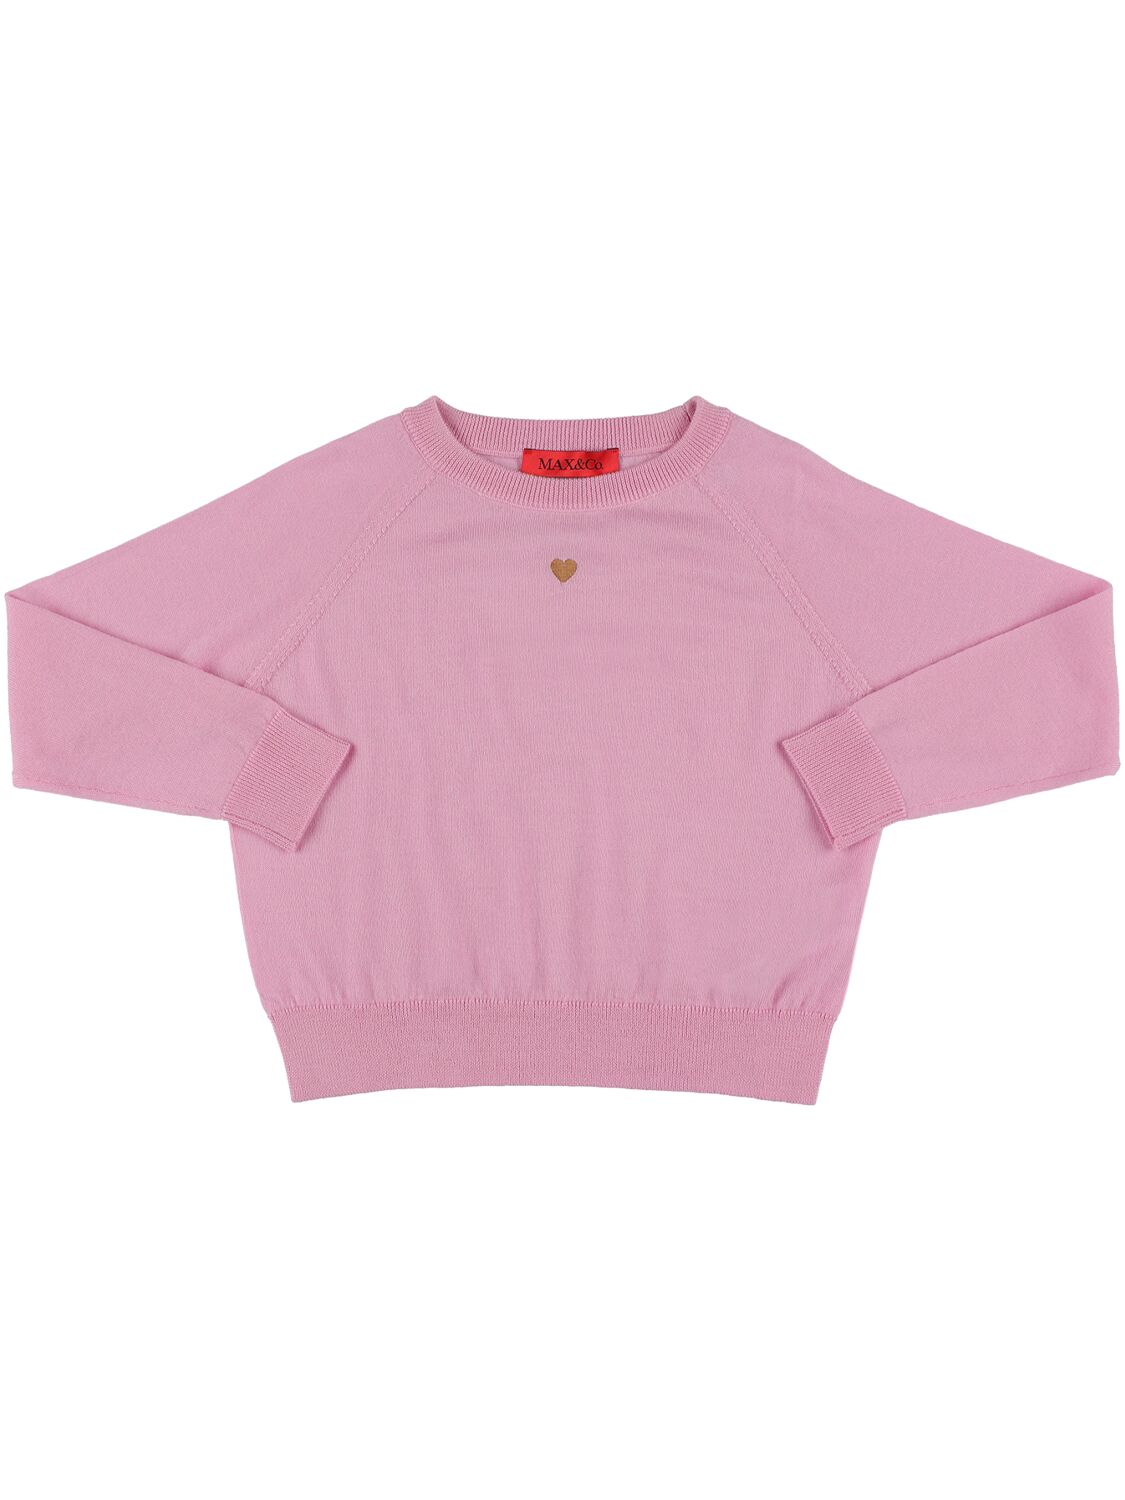 Max & Co Kids' Wool Knit Sweater In Pink